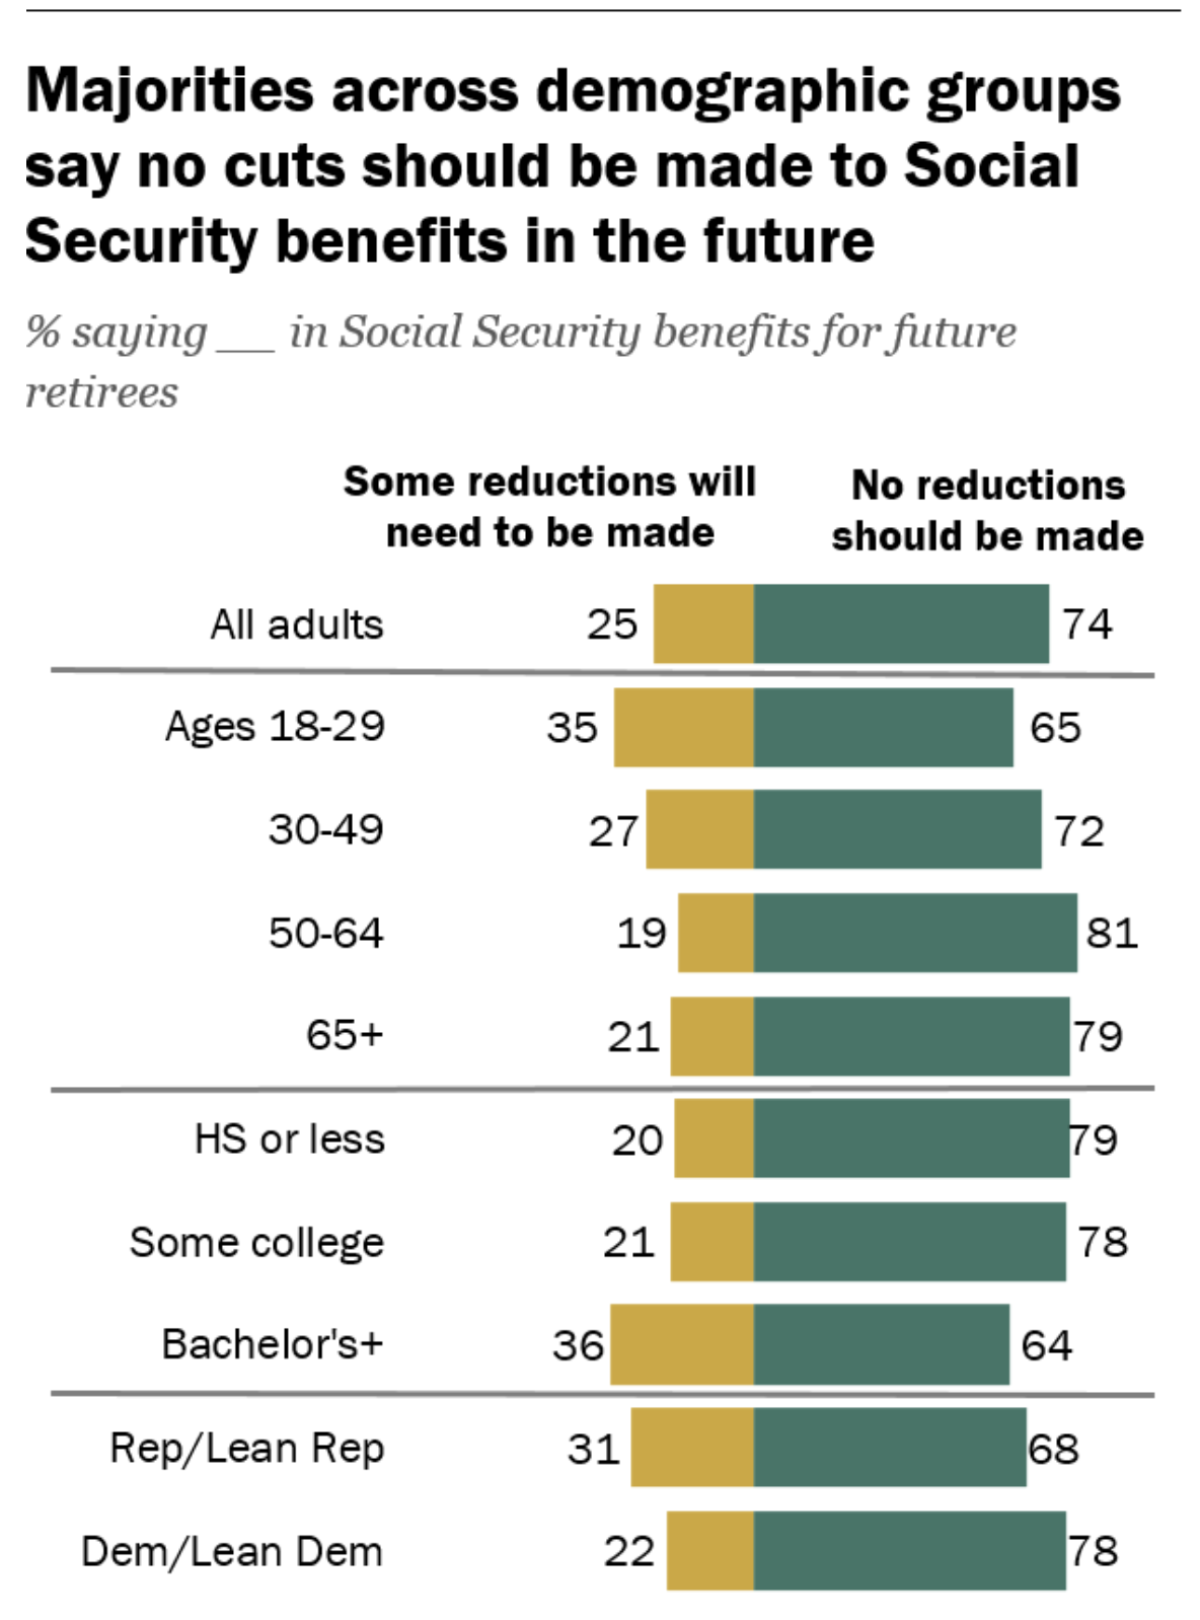 Americans across the political and demographic spectrums are solidly against cutting Social Security benefits.